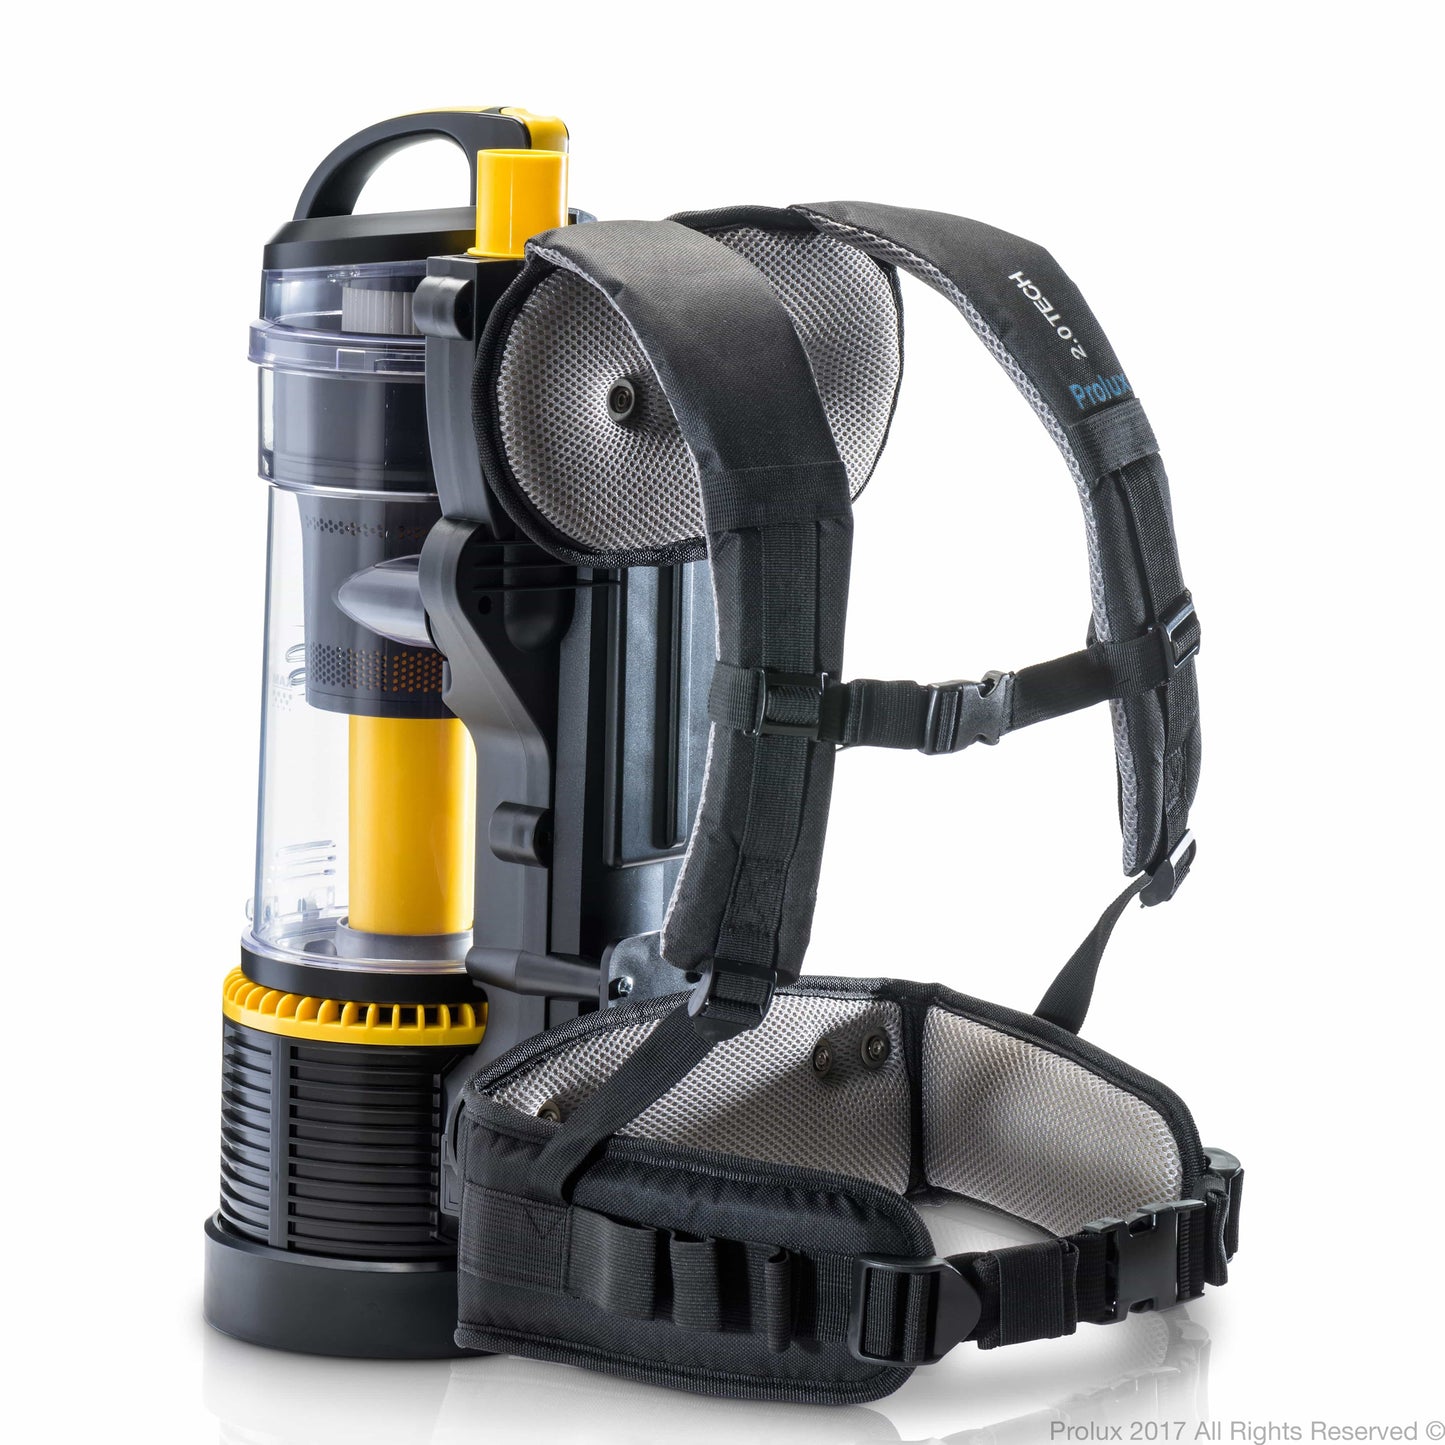 Demo Prolux 2.0 Commercial Bagless Backpack Vacuum Commercial Power Nozzle Kit